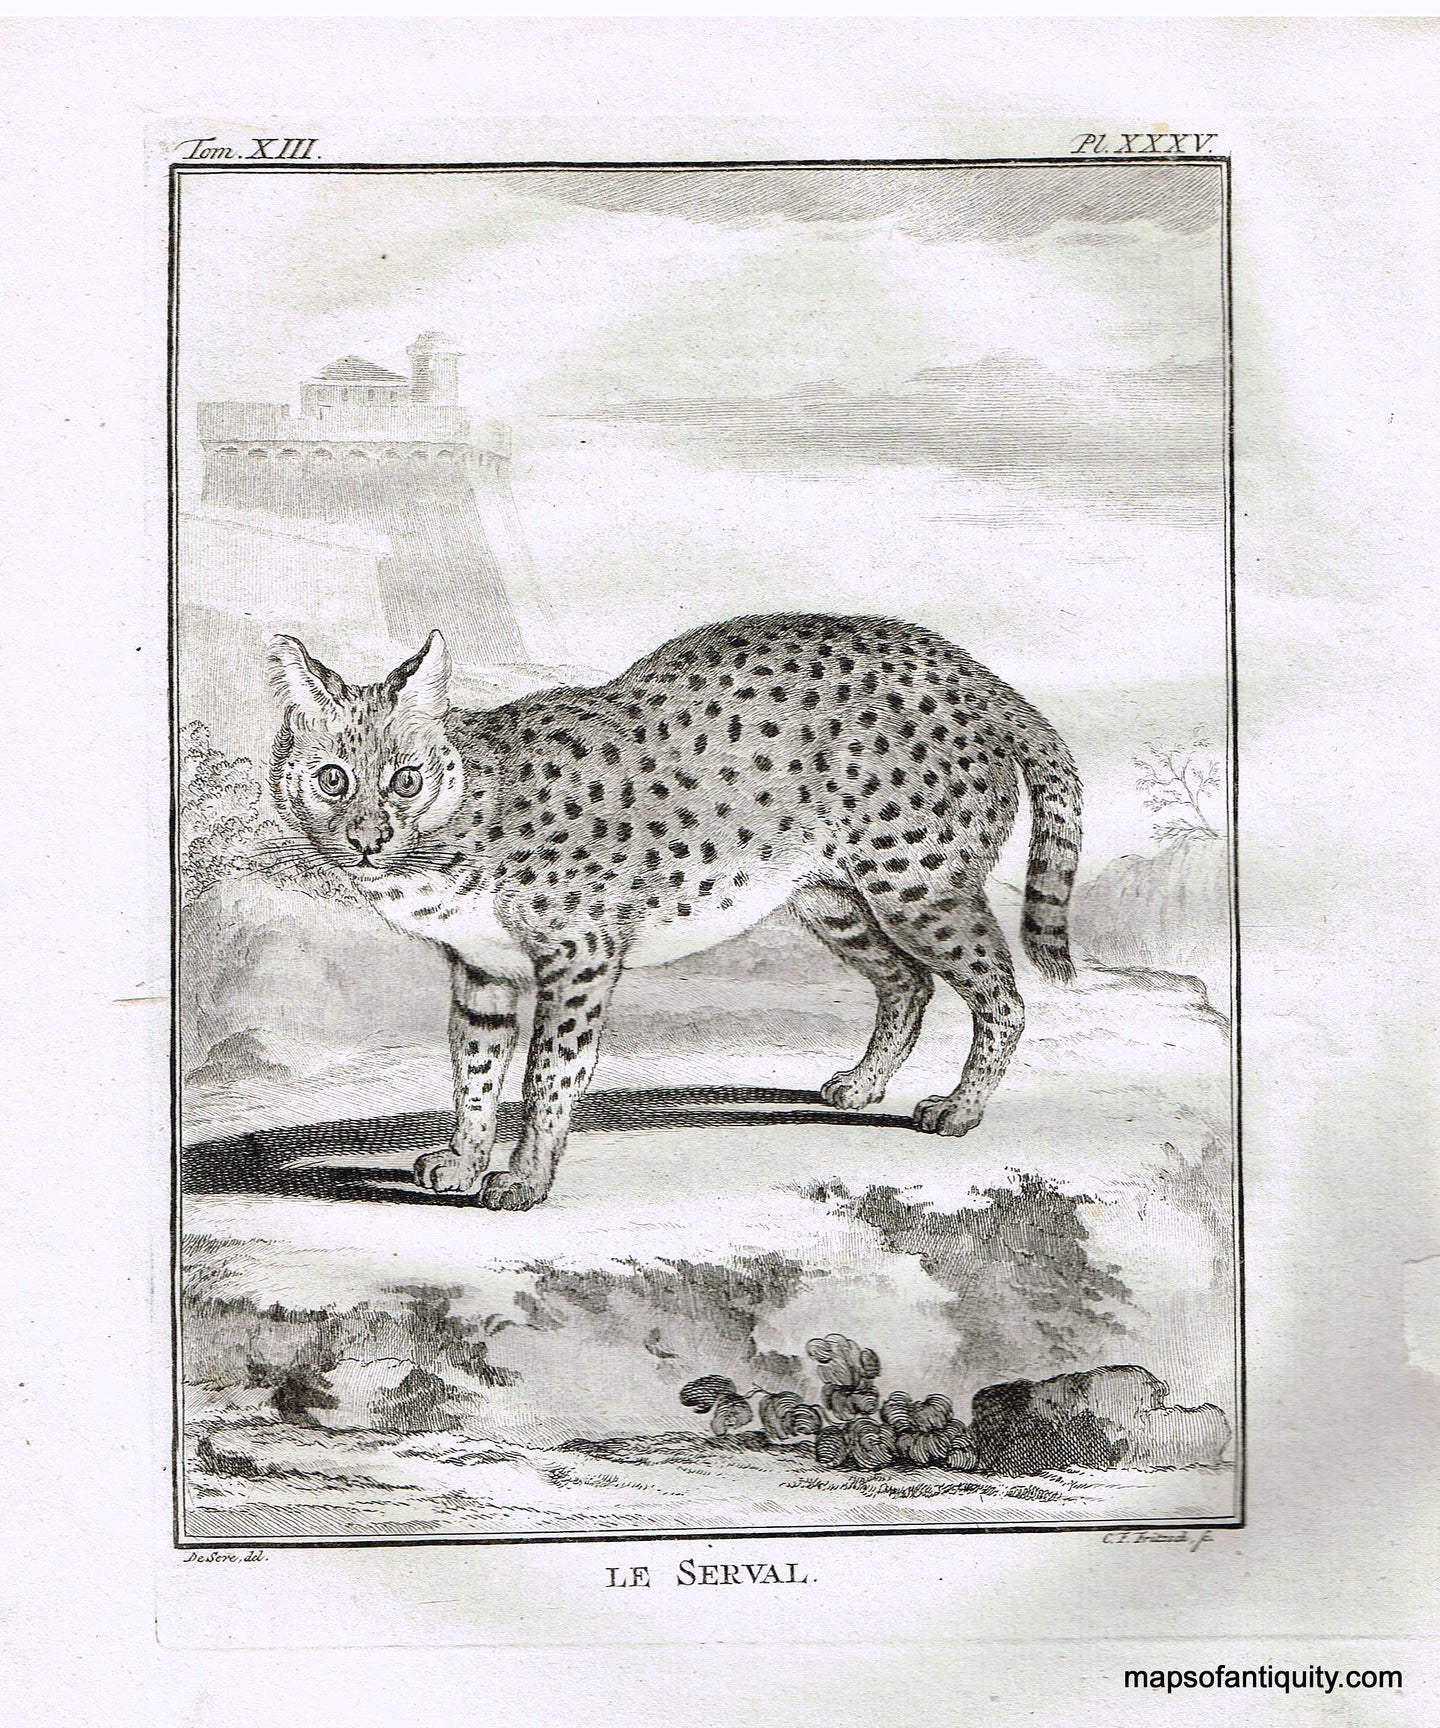 Antique-Black-and-White-Engraved-Illustration-Le-Serval-**********-Natural-History-Prints-Animals-c.-1790-Buffon-Maps-Of-Antiquity